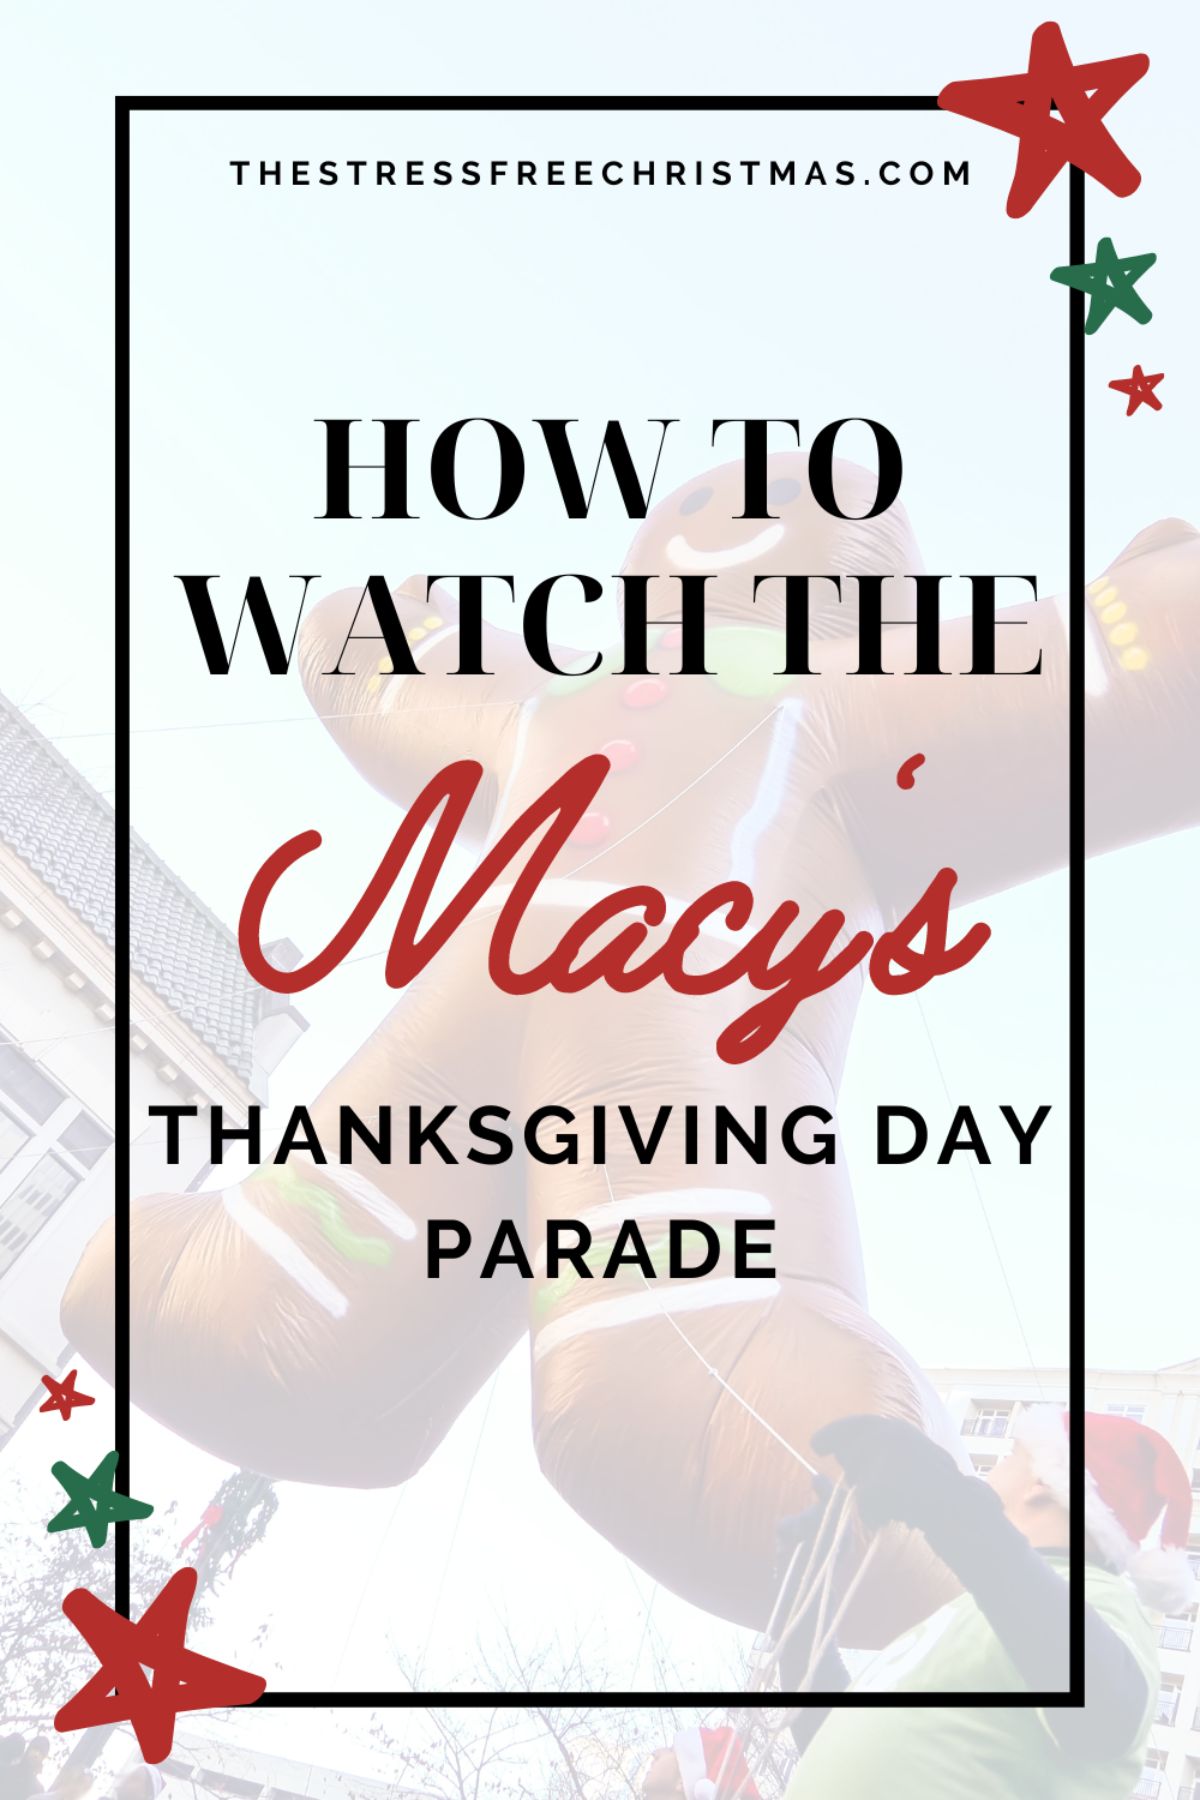 gingerbread man balloon with text how to watch the Macy's thanksgiving day parade over it